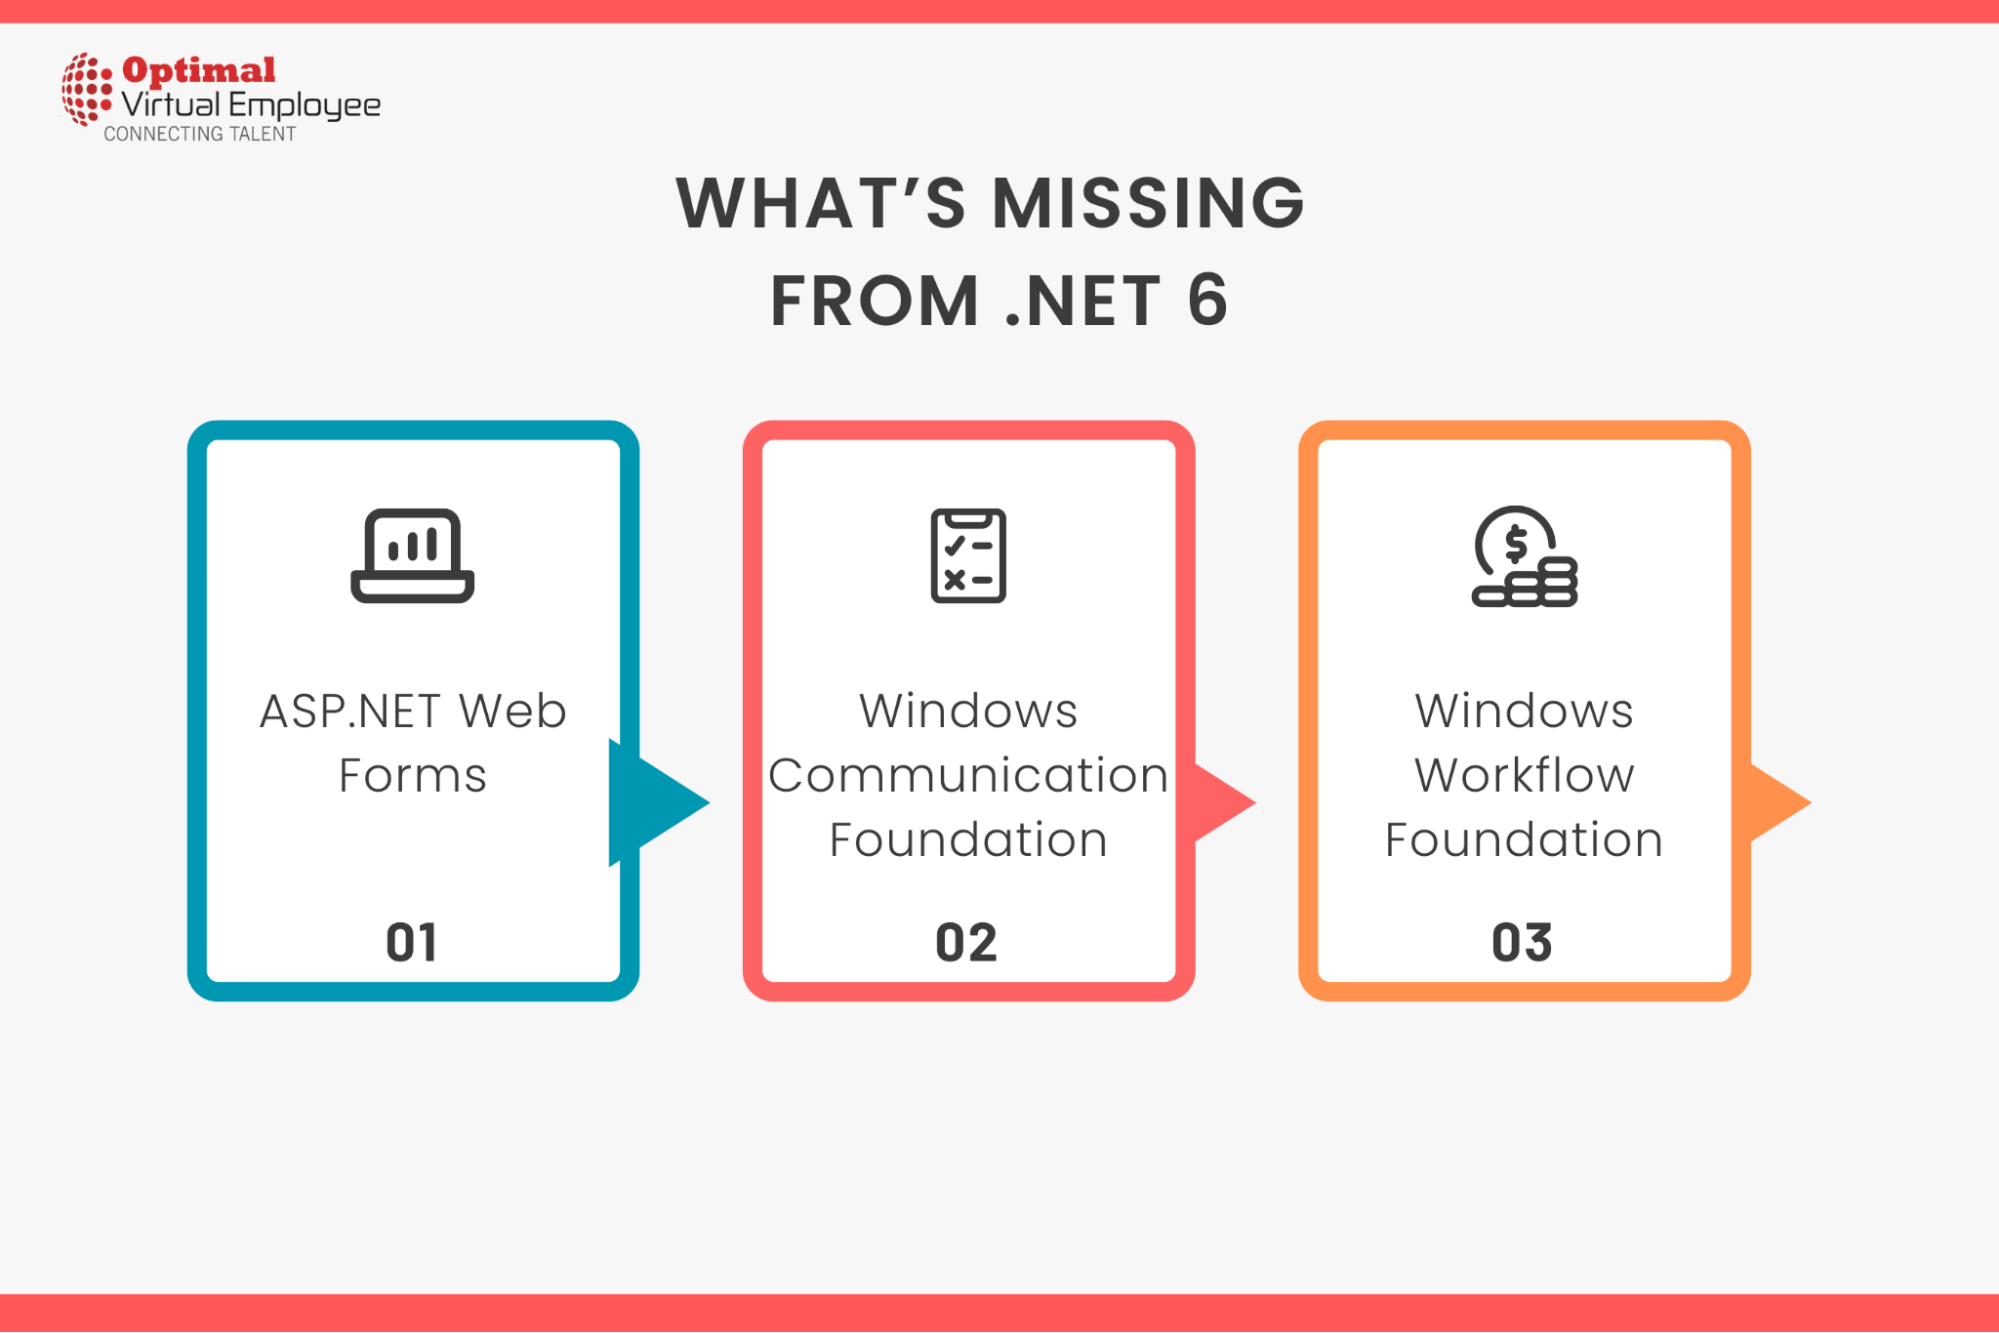 What’s missing from .NET 6